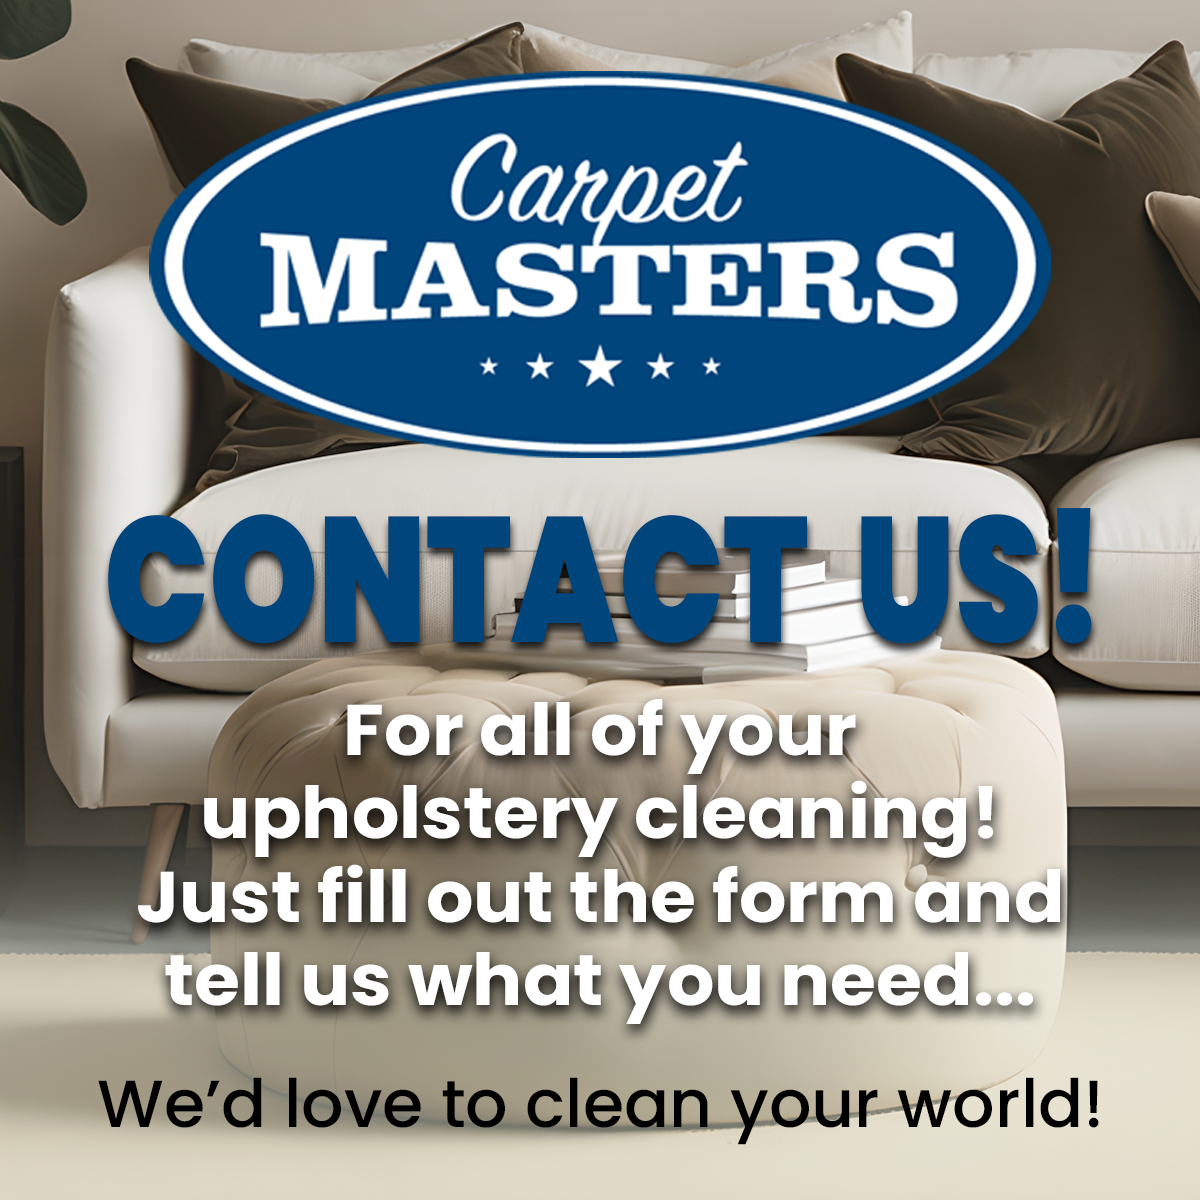 Contact Us for all of your upholstery cleaning! Just tell us what you need...